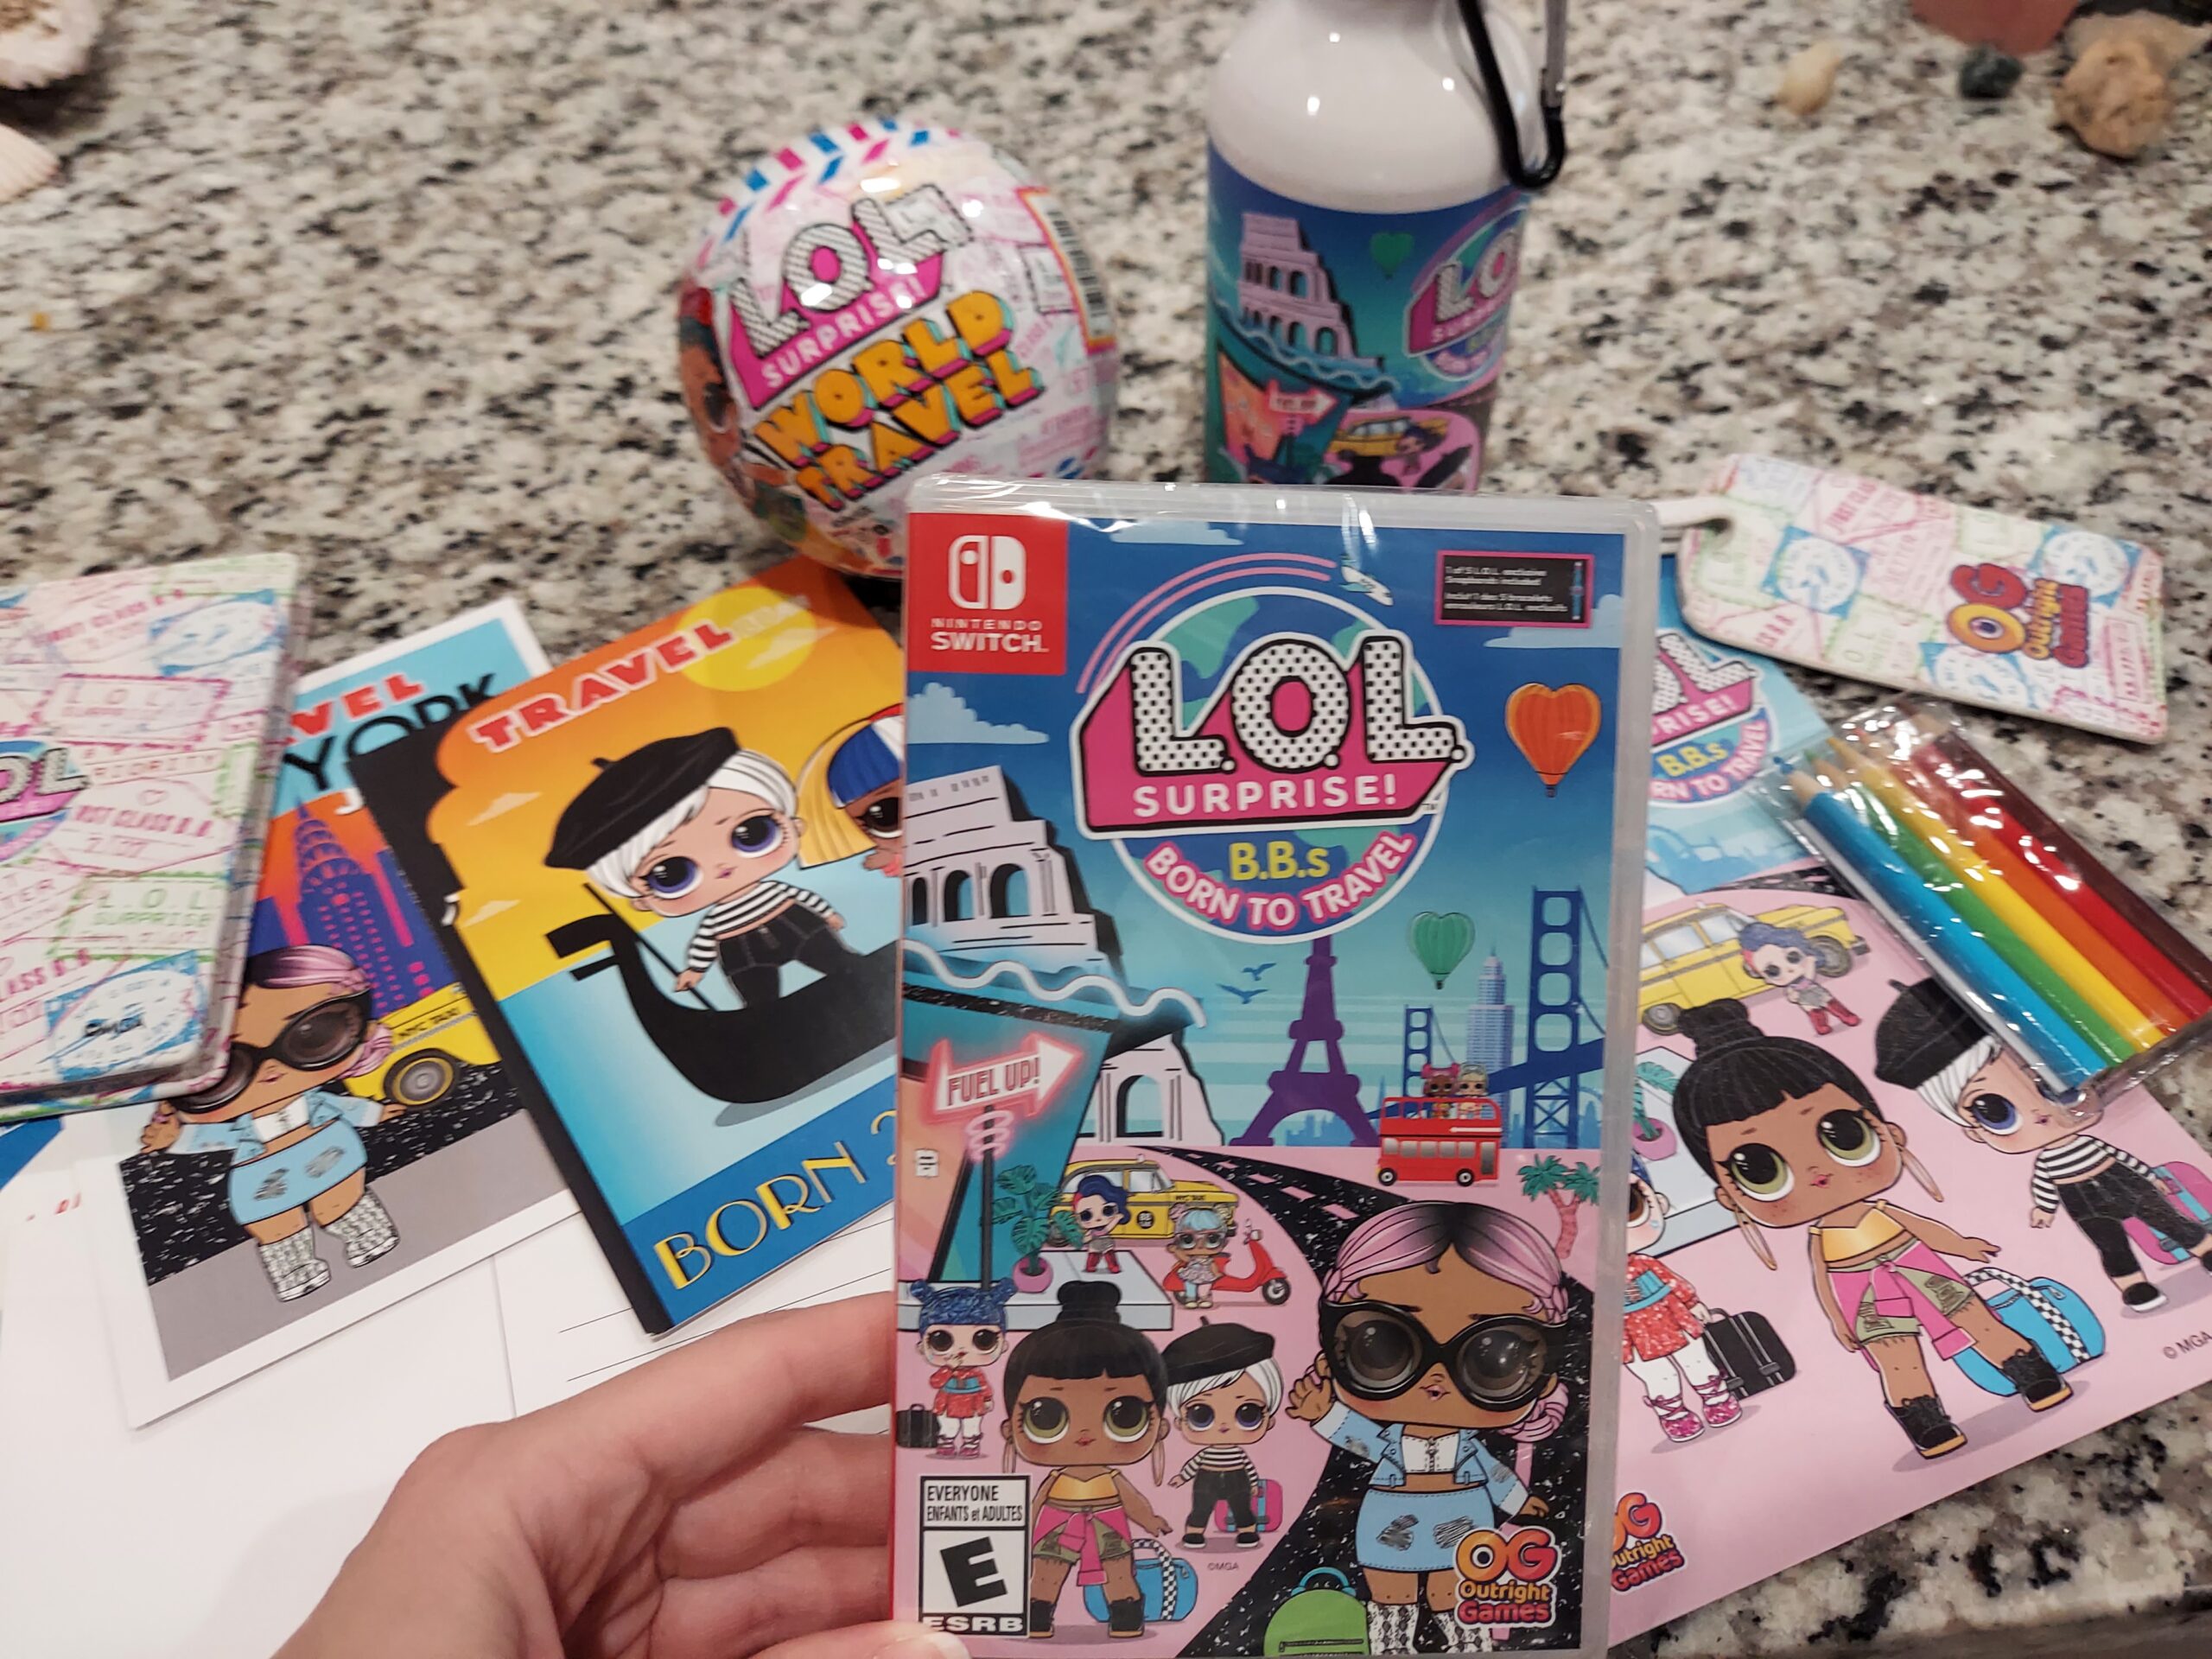 L.O.L. is Travel Fun Available PC! to Surprise! XB, Born PS5, PS4, Now New AND B.B.s SWITCH, Game on